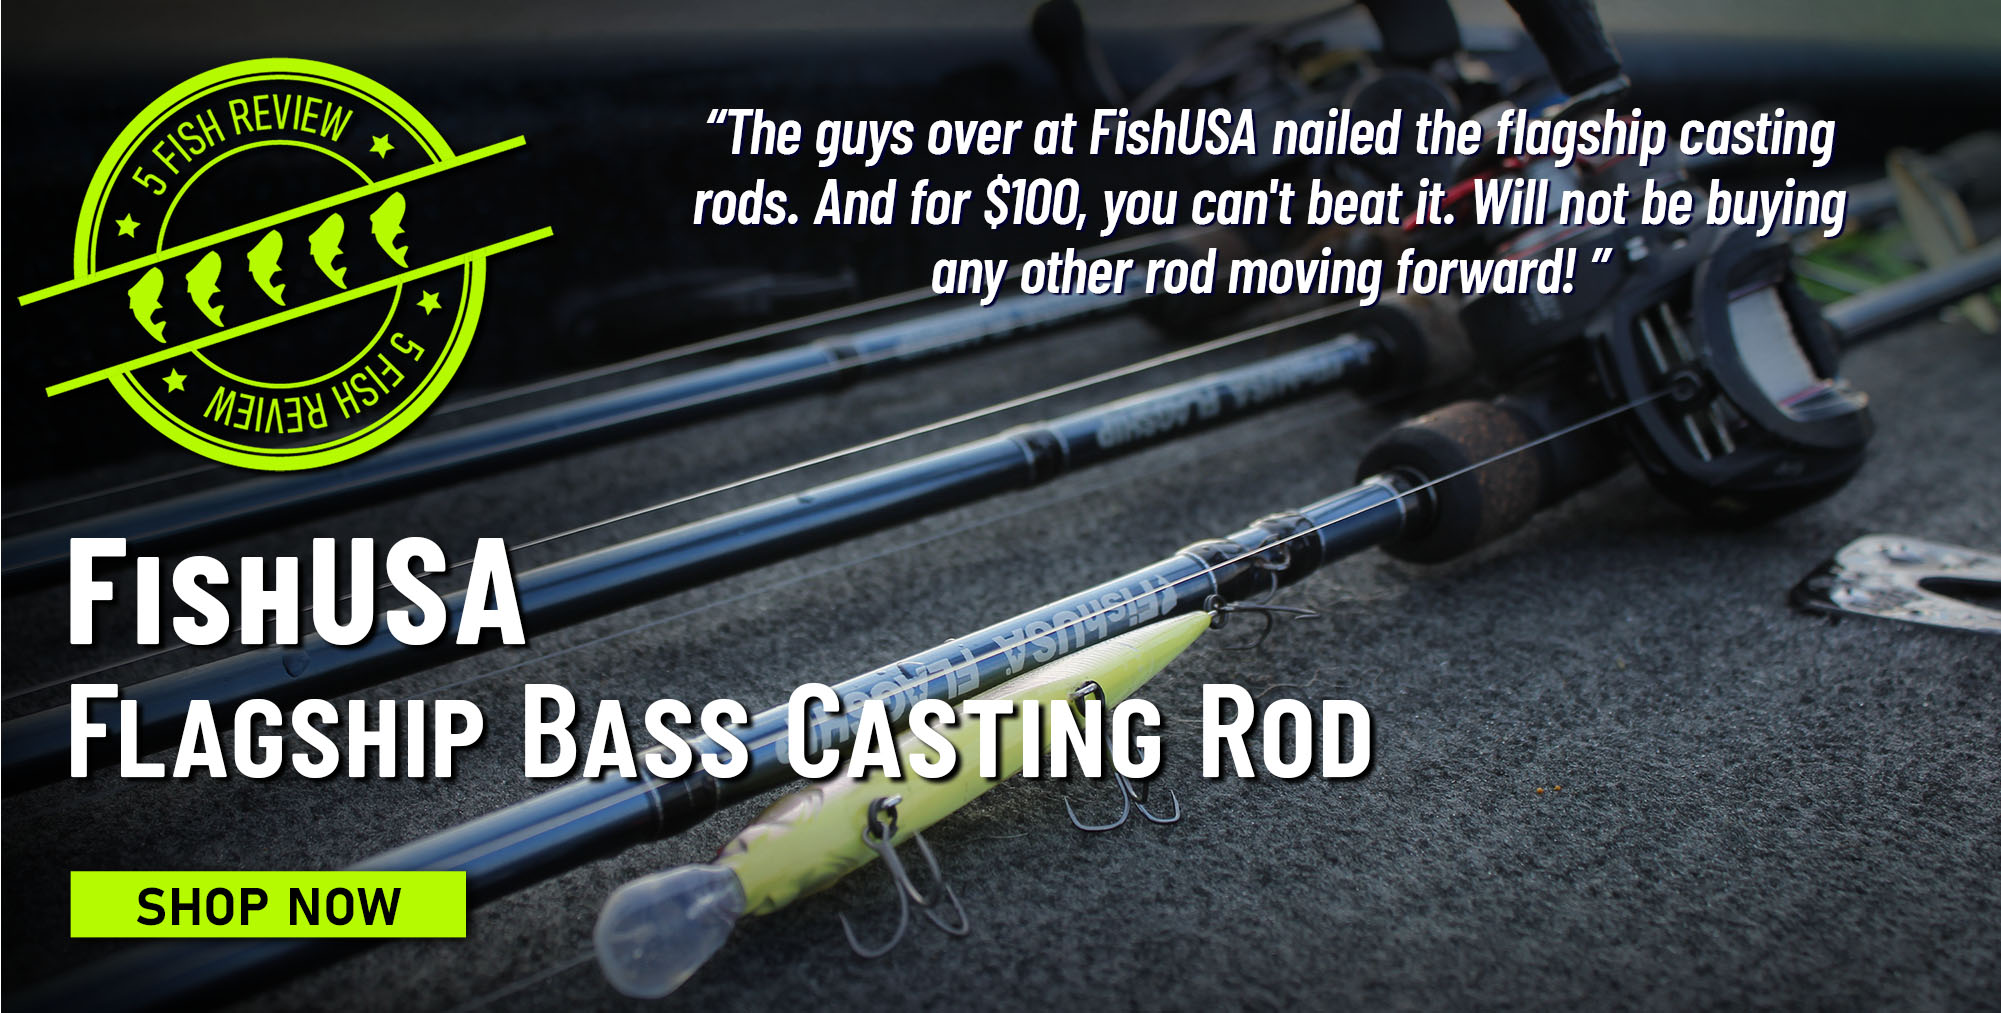 5 Fish Review FishUSA Flagship Bass Casting Rod The guys over at FishUSA nailed the flagship casting rods. And for $100, you can't beat it. Will not be buying any other rod moving forward!  Shop Now